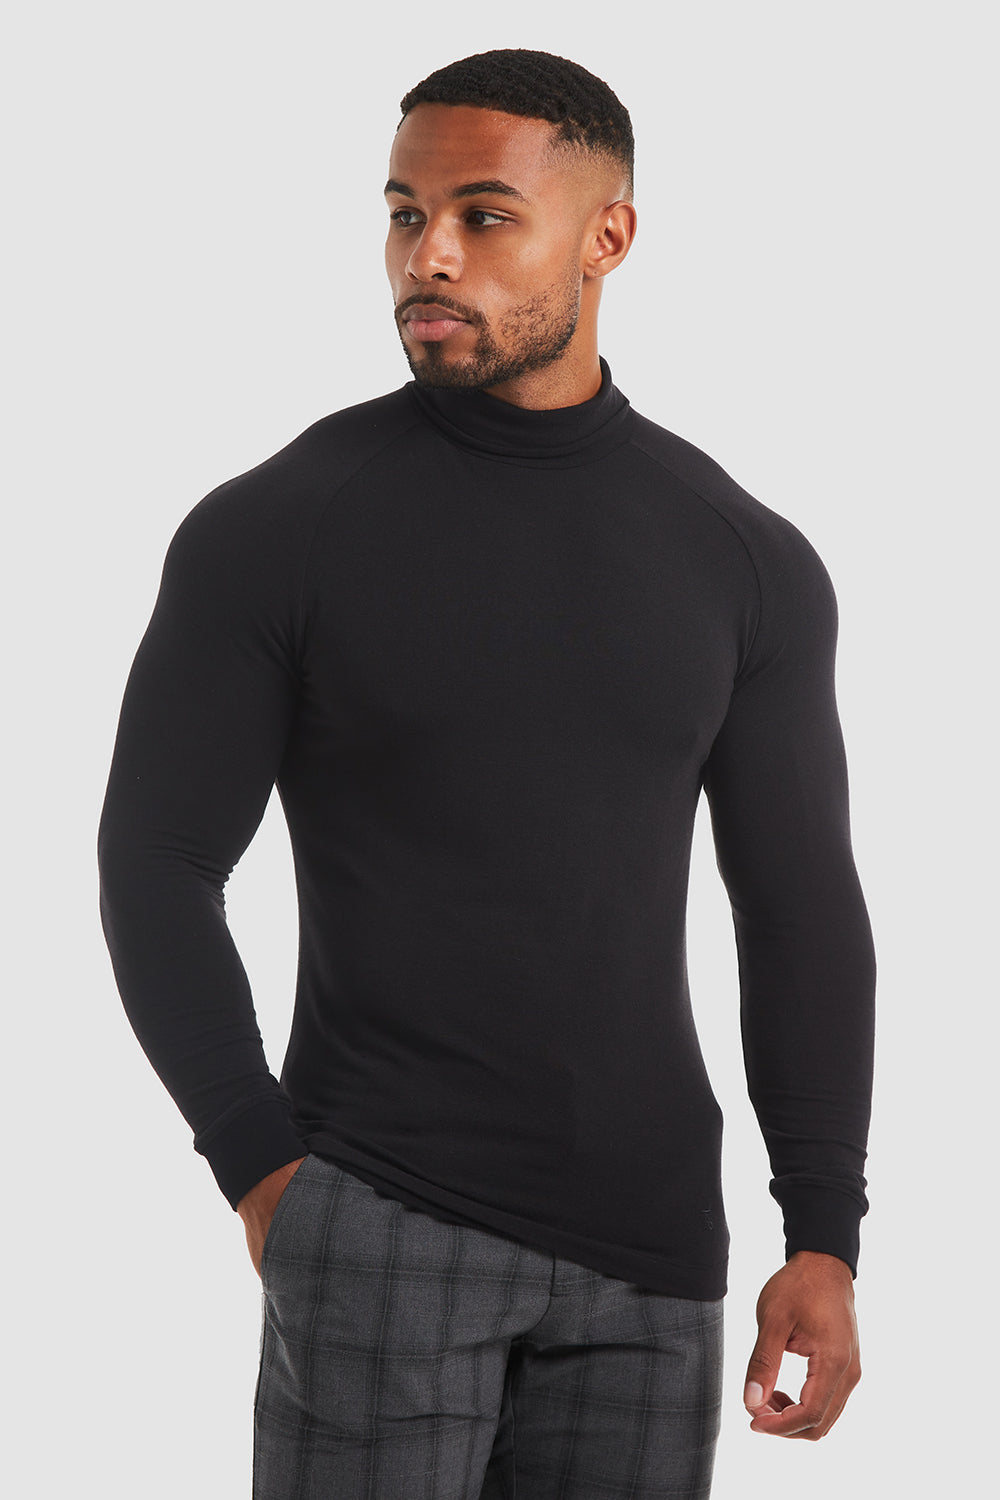 Roll USA - - Neck Black (LS) TAILORED ATHLETE in Jersey Knit Look